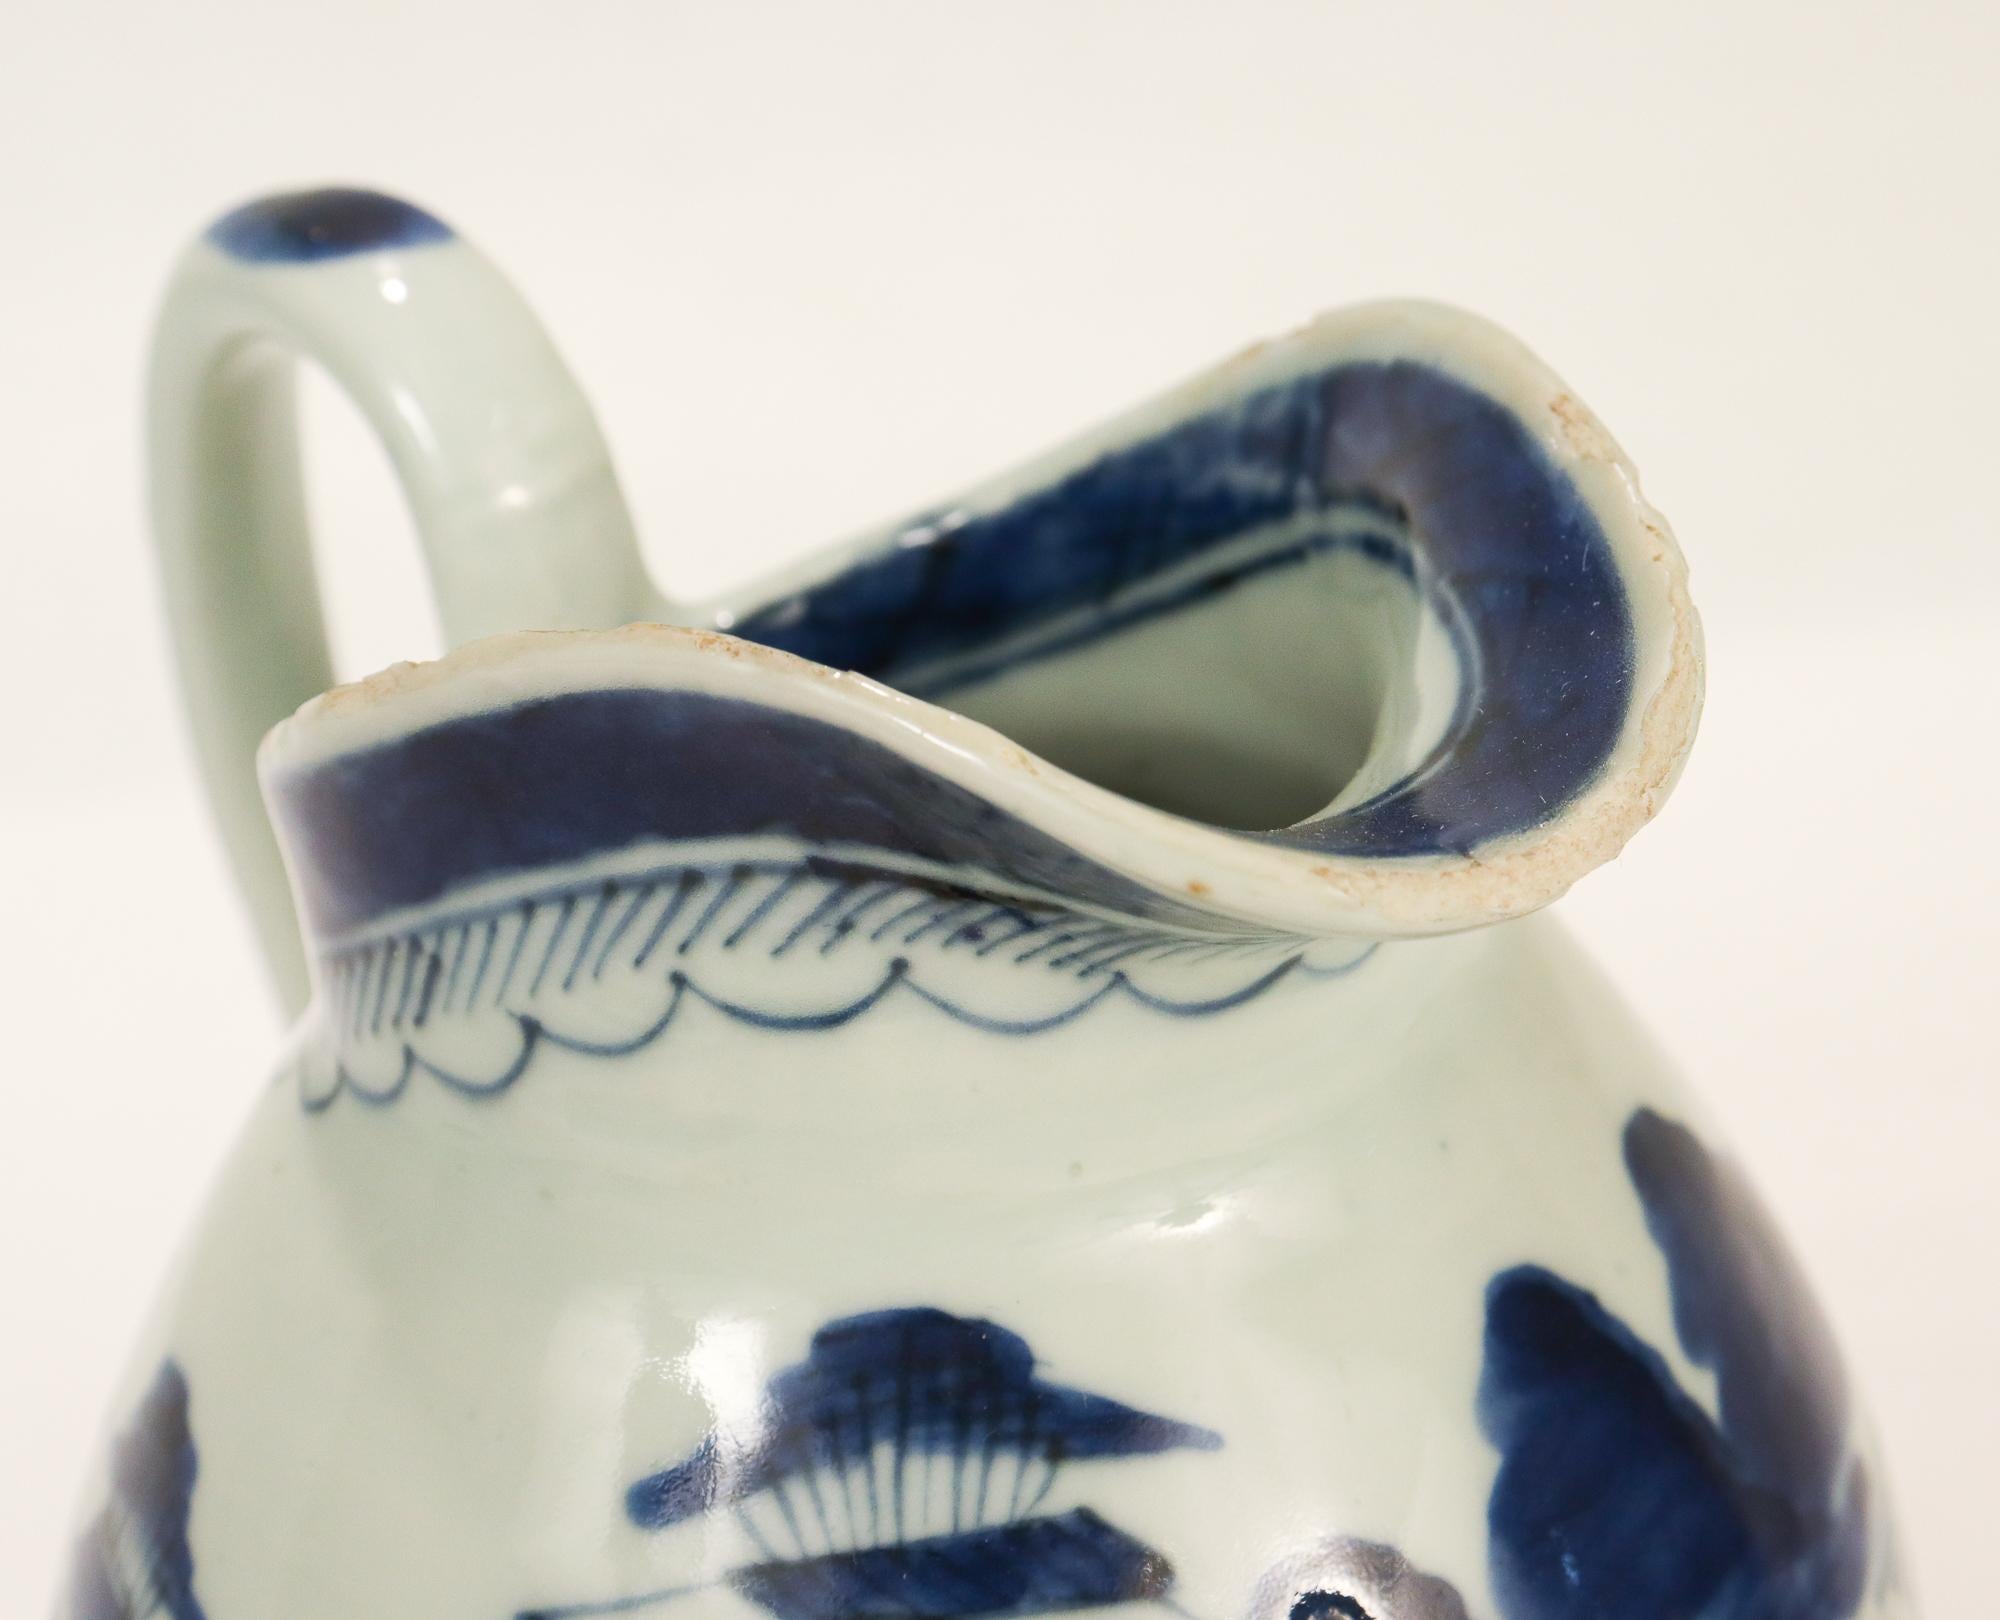 Antique Blue & White Canton Chinese Export Porcelain Pitcher or Jug 10